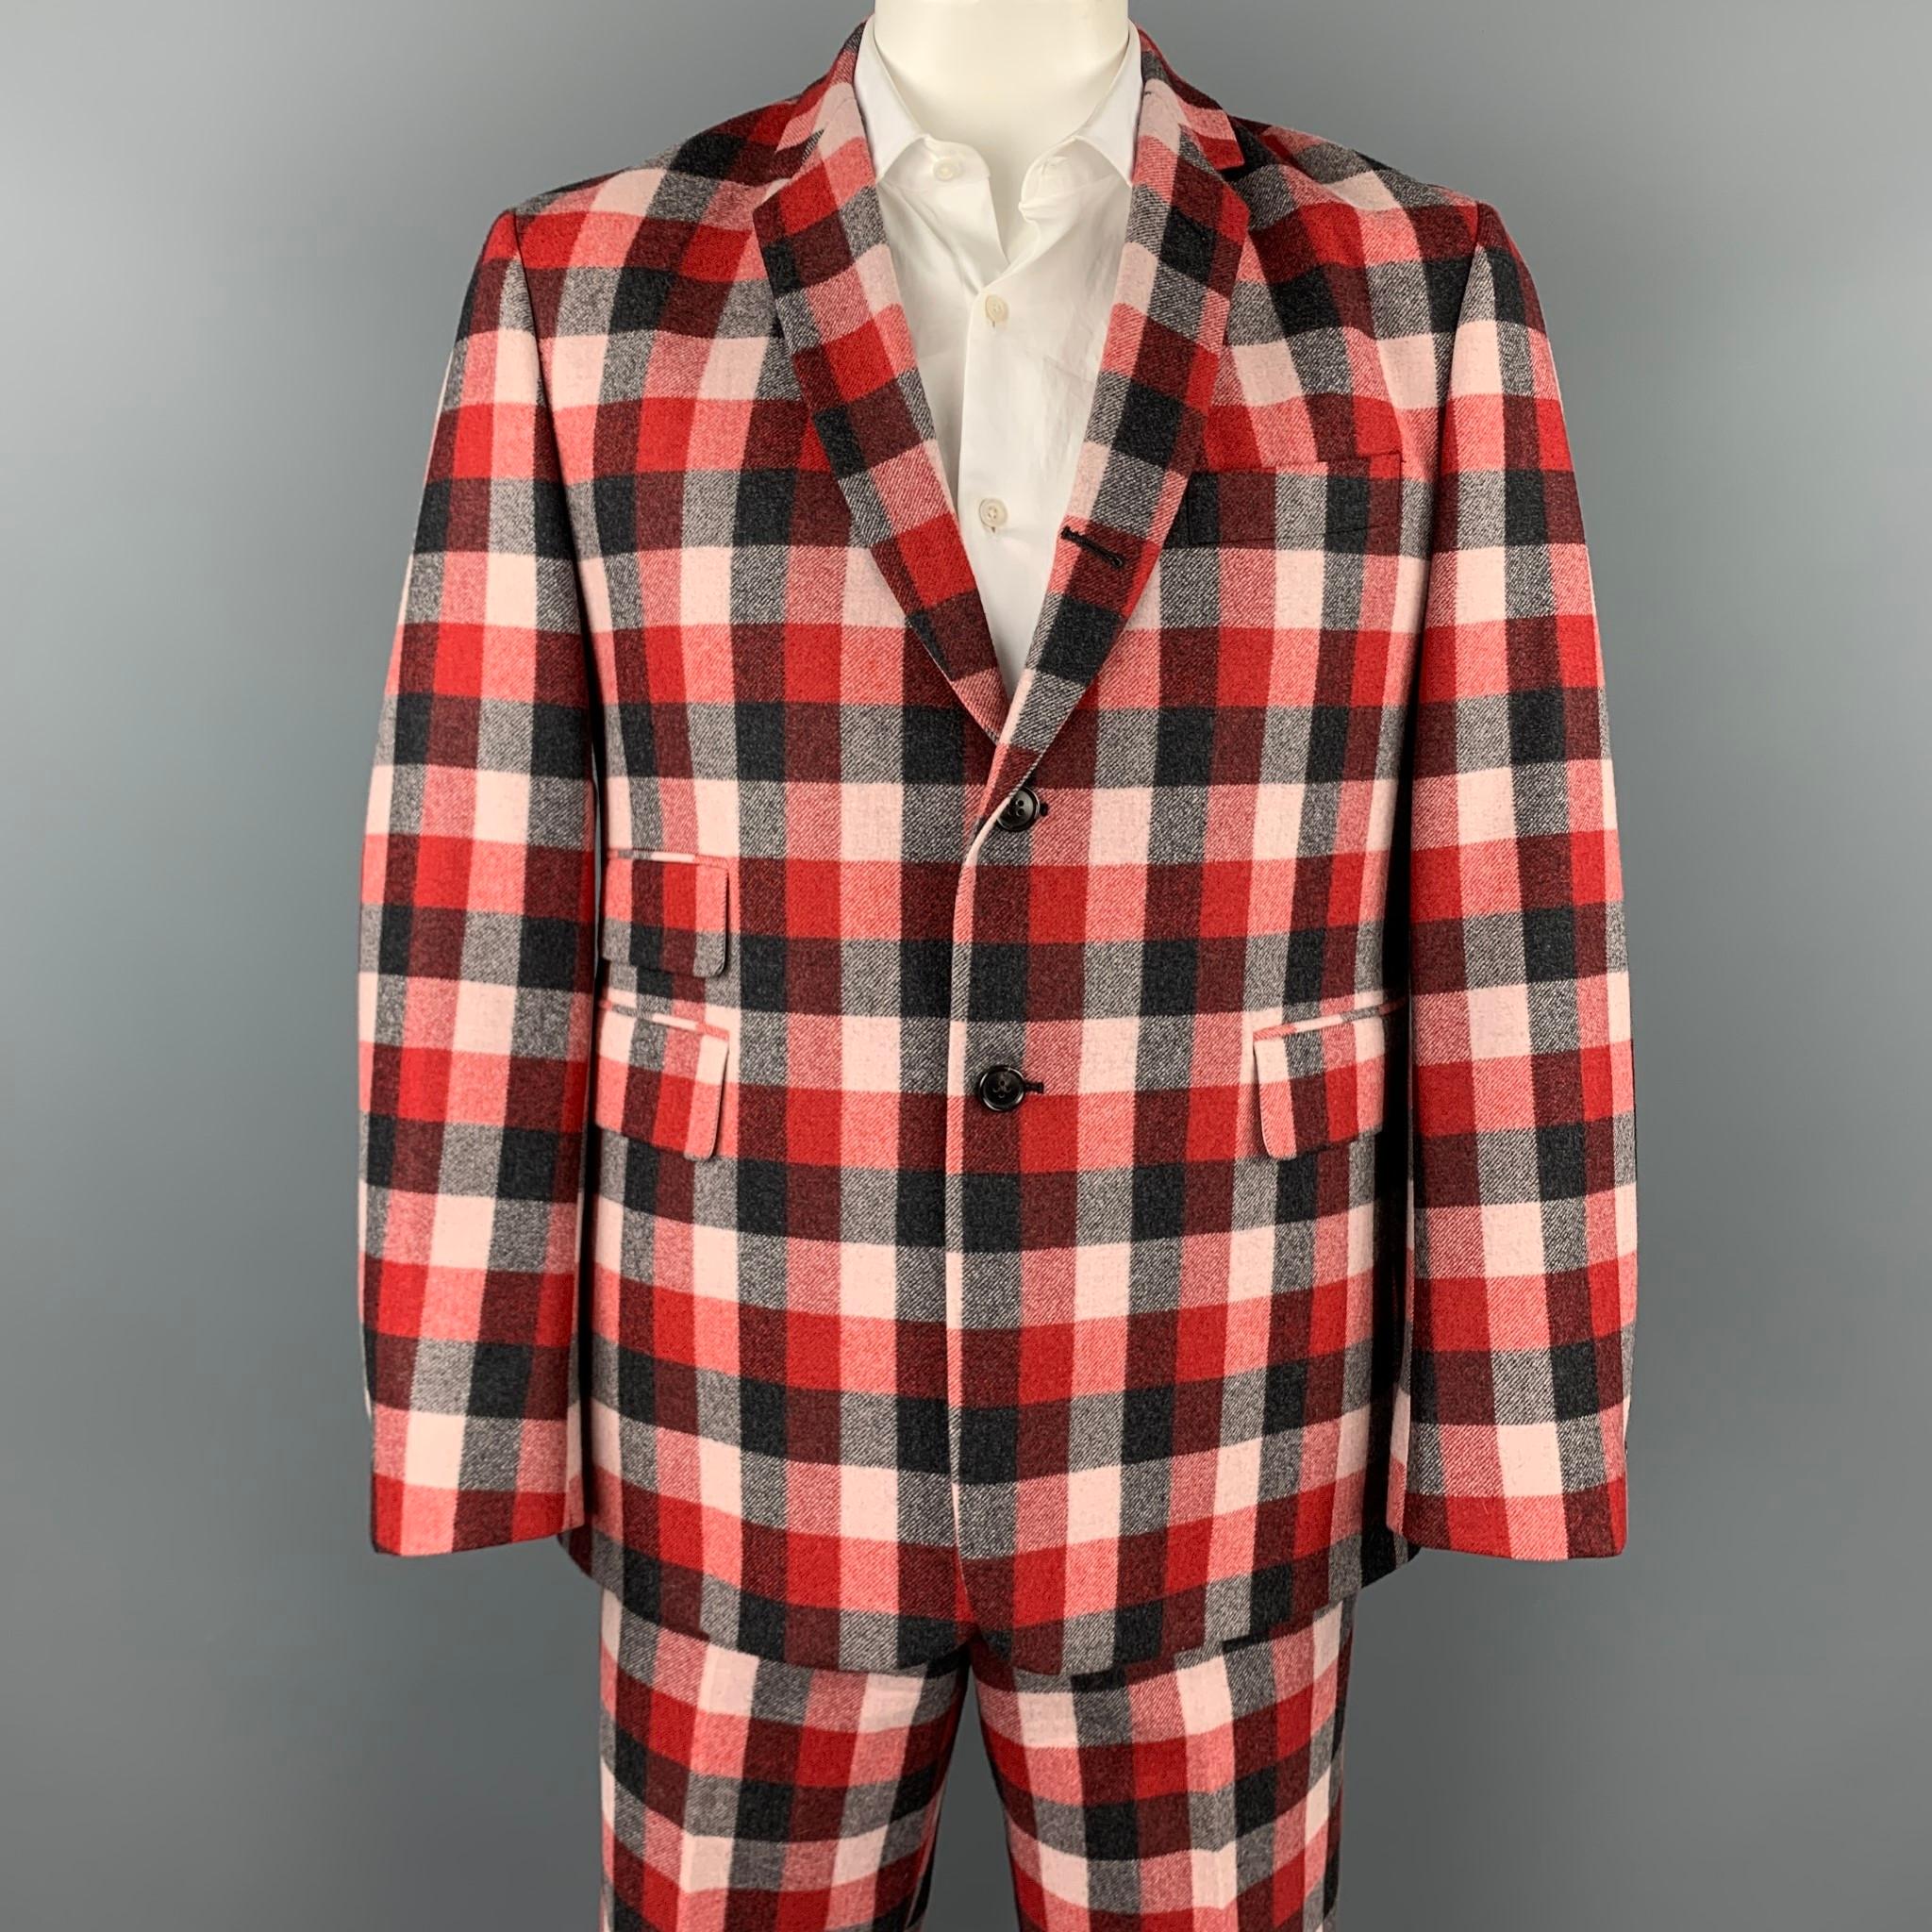 BLACK FLEECE shorts suit comes in a black & red plaid wool with a full liner and includes a single breasted,  three button sport coat with a notch lapel and matching shorts.

Very Good Pre-Owned Condition.
Marked: